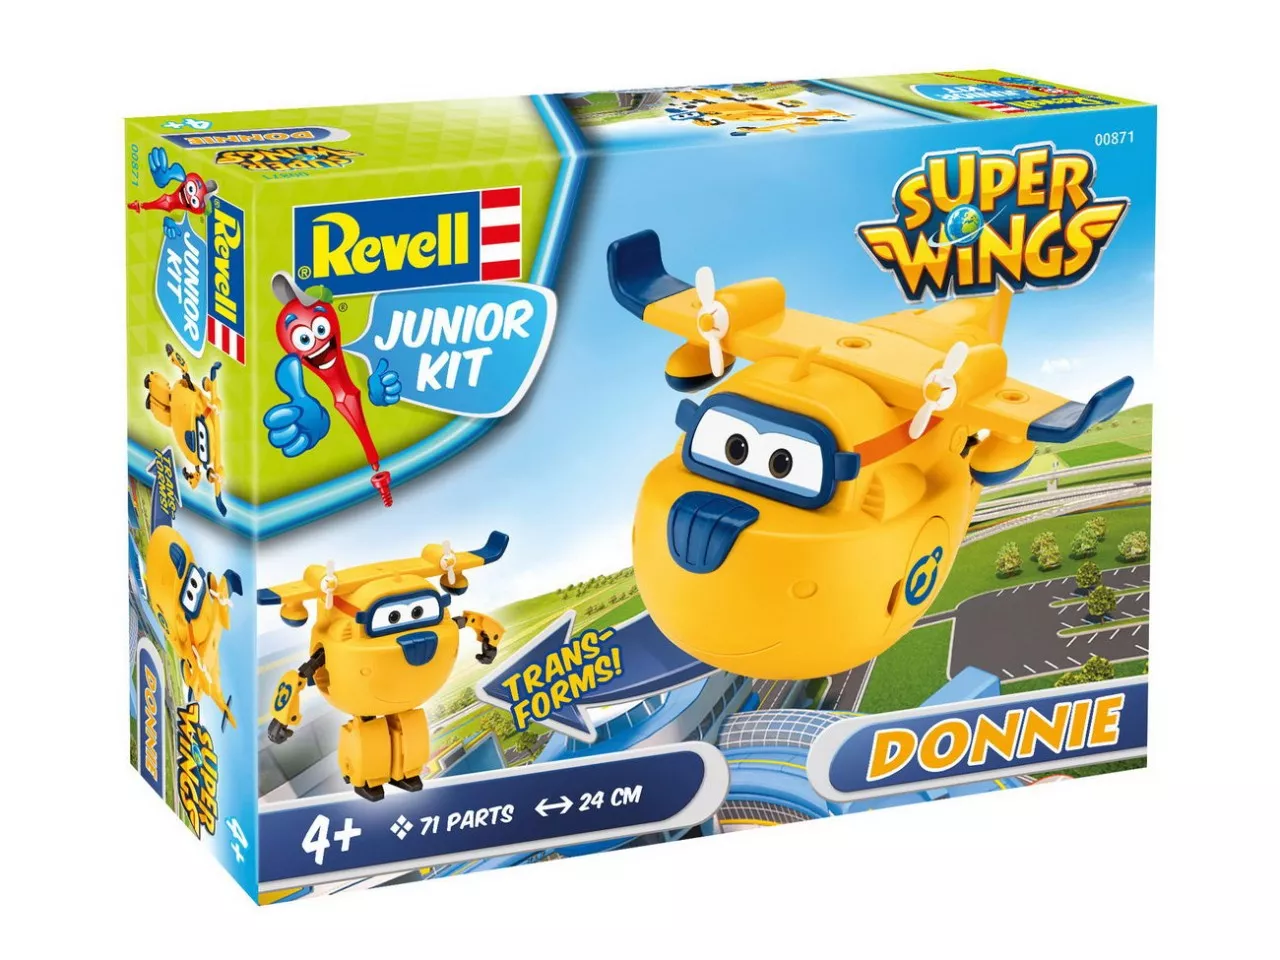 Revell 00871 Donnie 1:20